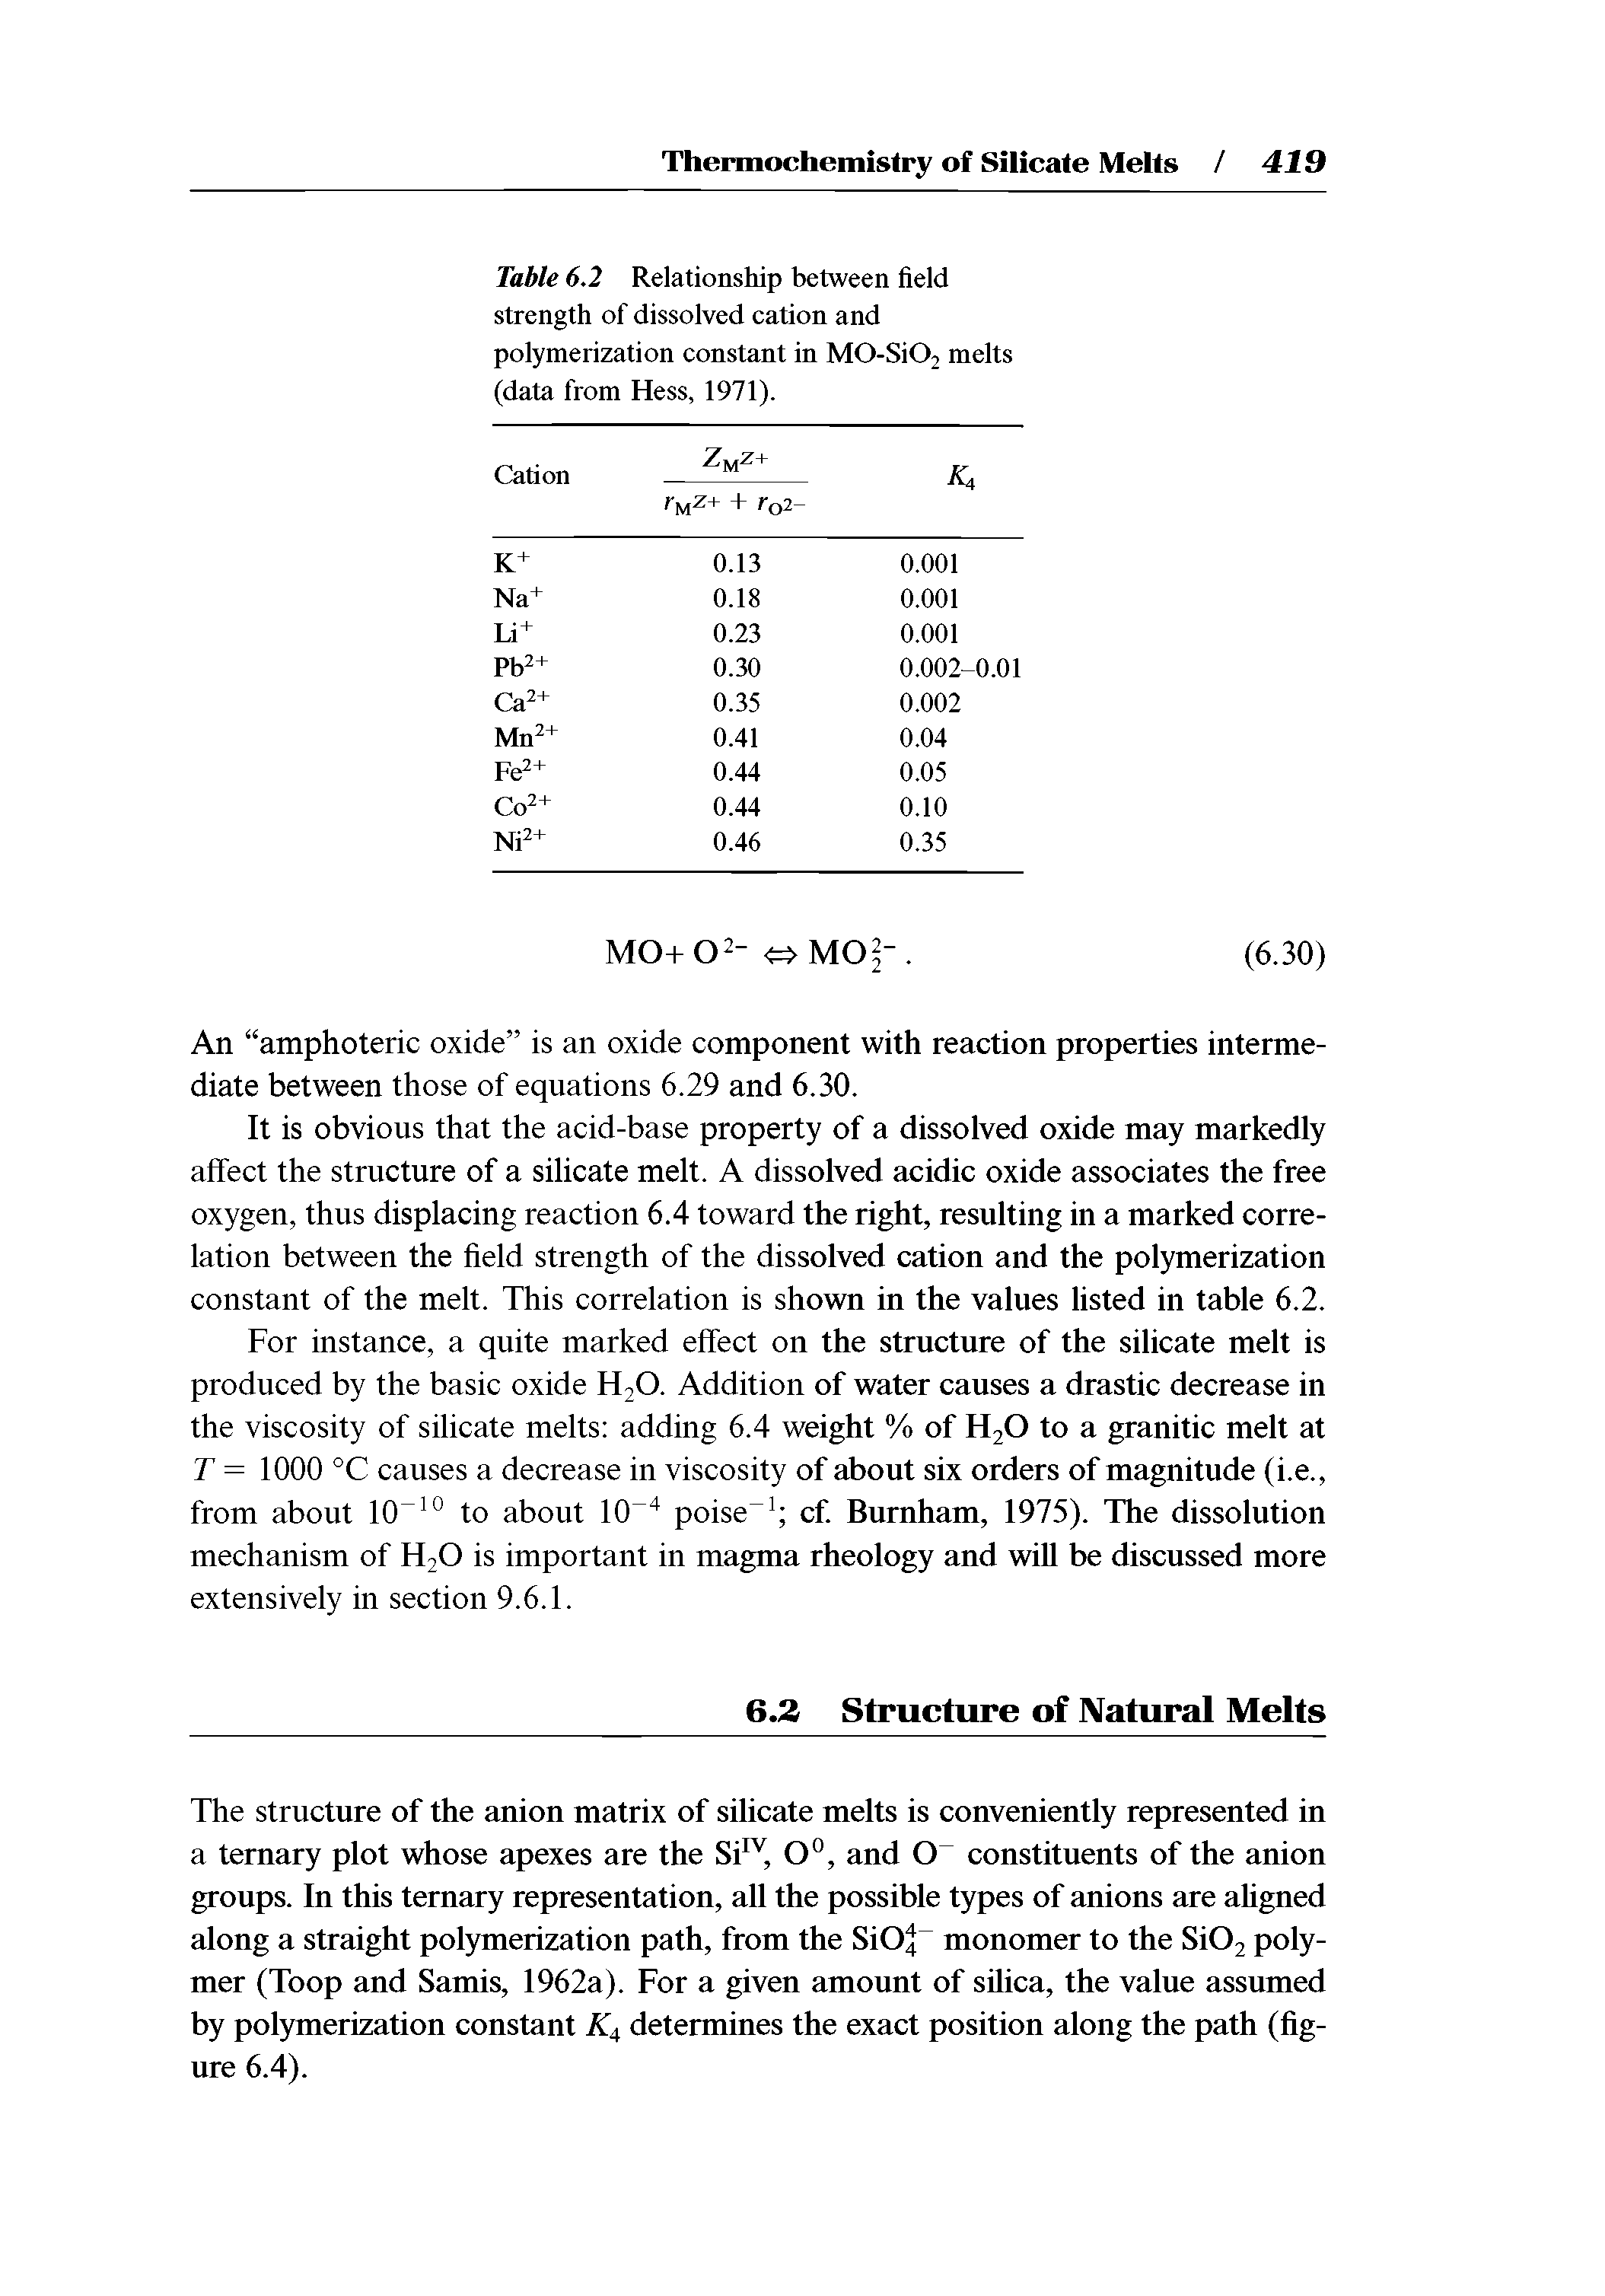 Table 6.2 Relationship between field strength of dissolved cation and polymerization constant in M0-Si02 melts (data from Hess, 1971).